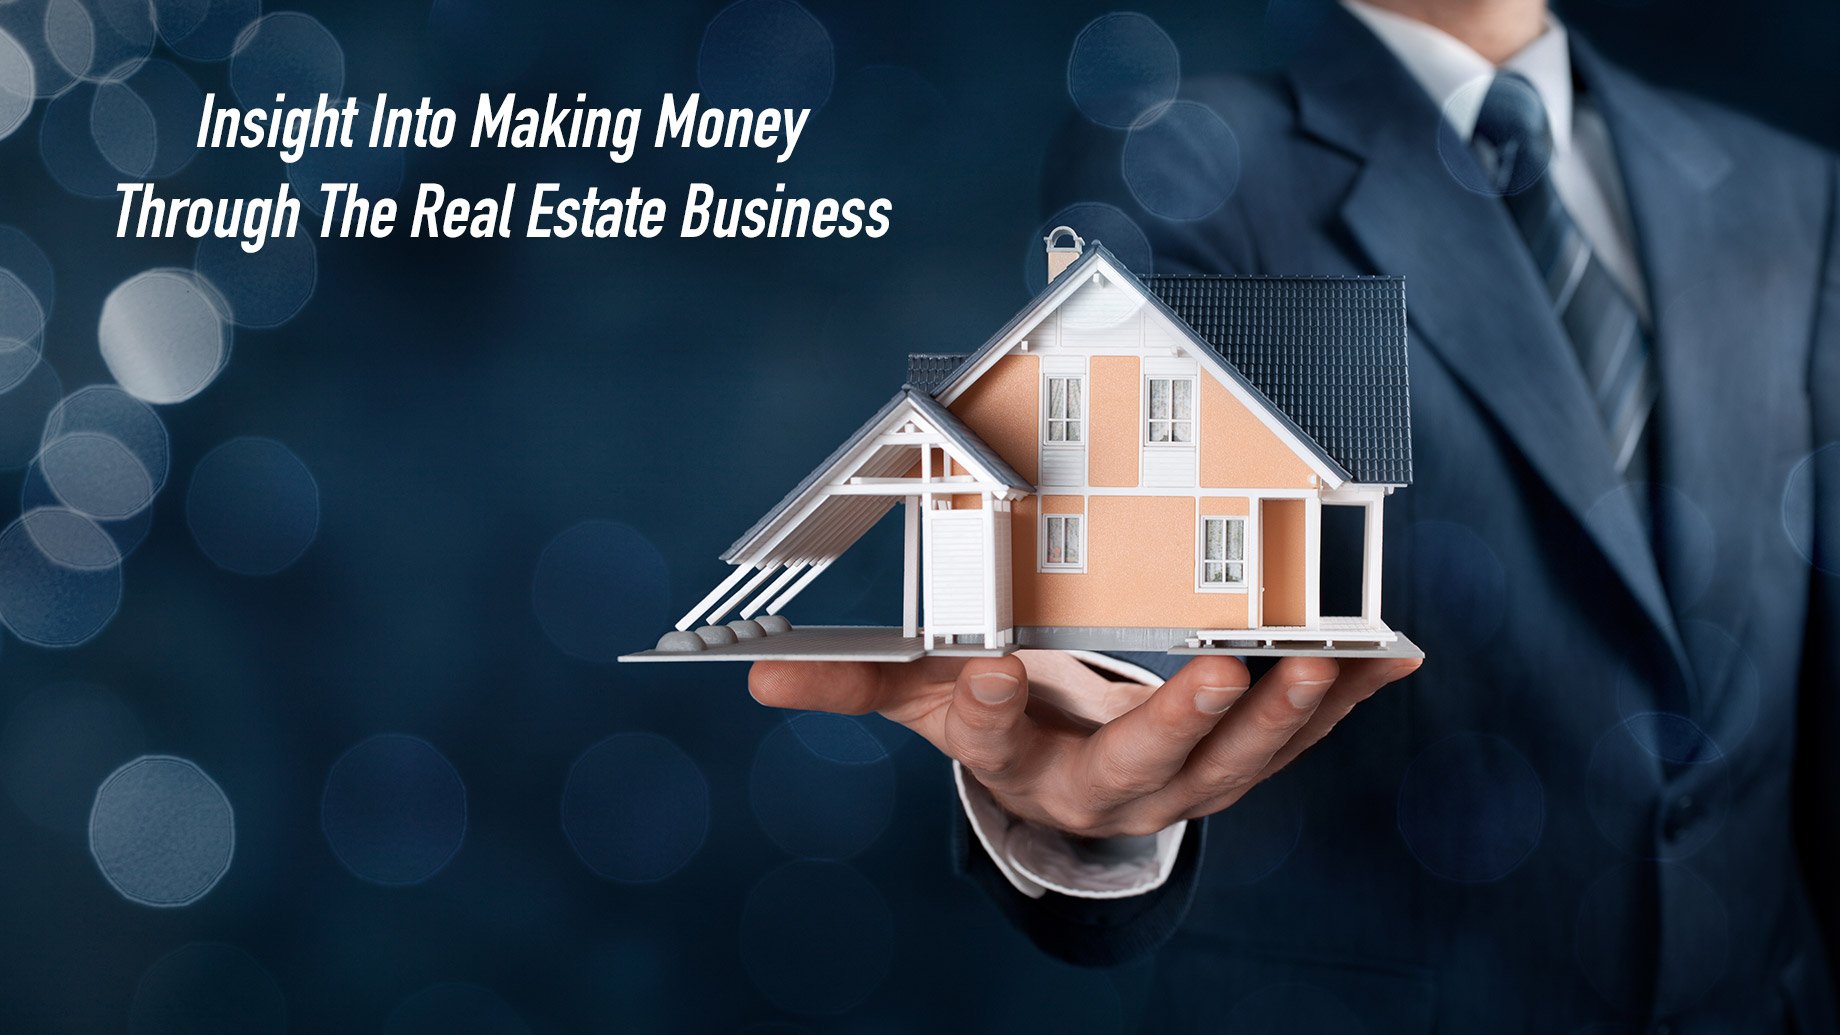 How do people make money in real estate